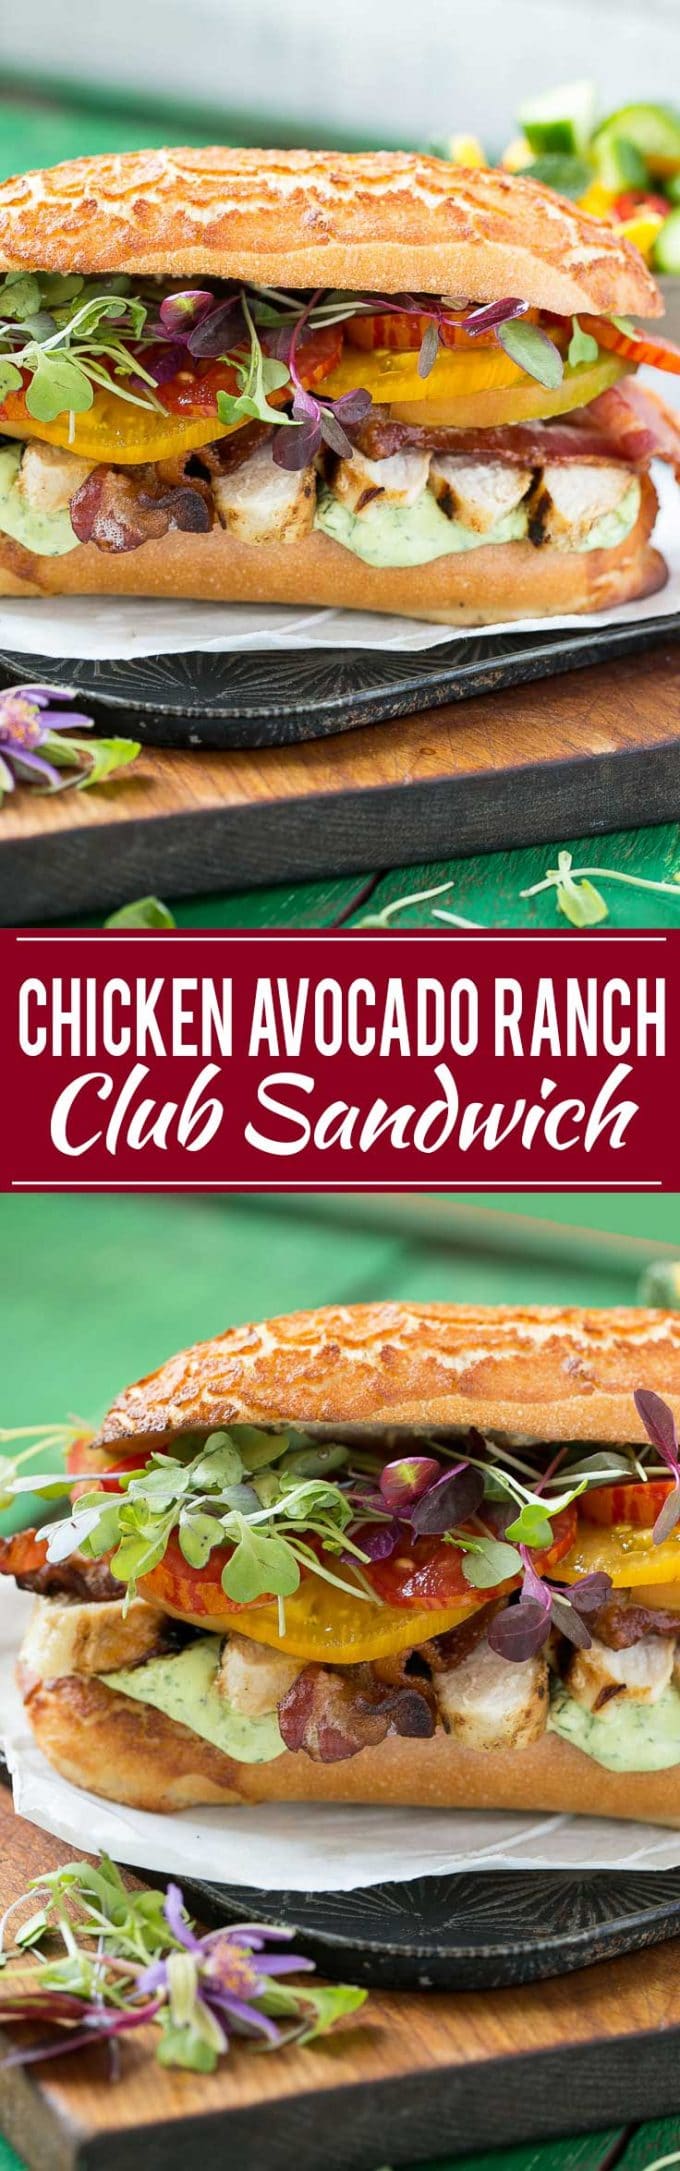 This updated club sandwich includes lemon herb grilled chicken, homemade avocado ranch spread, plenty of bacon and lots of summer tomatoes.